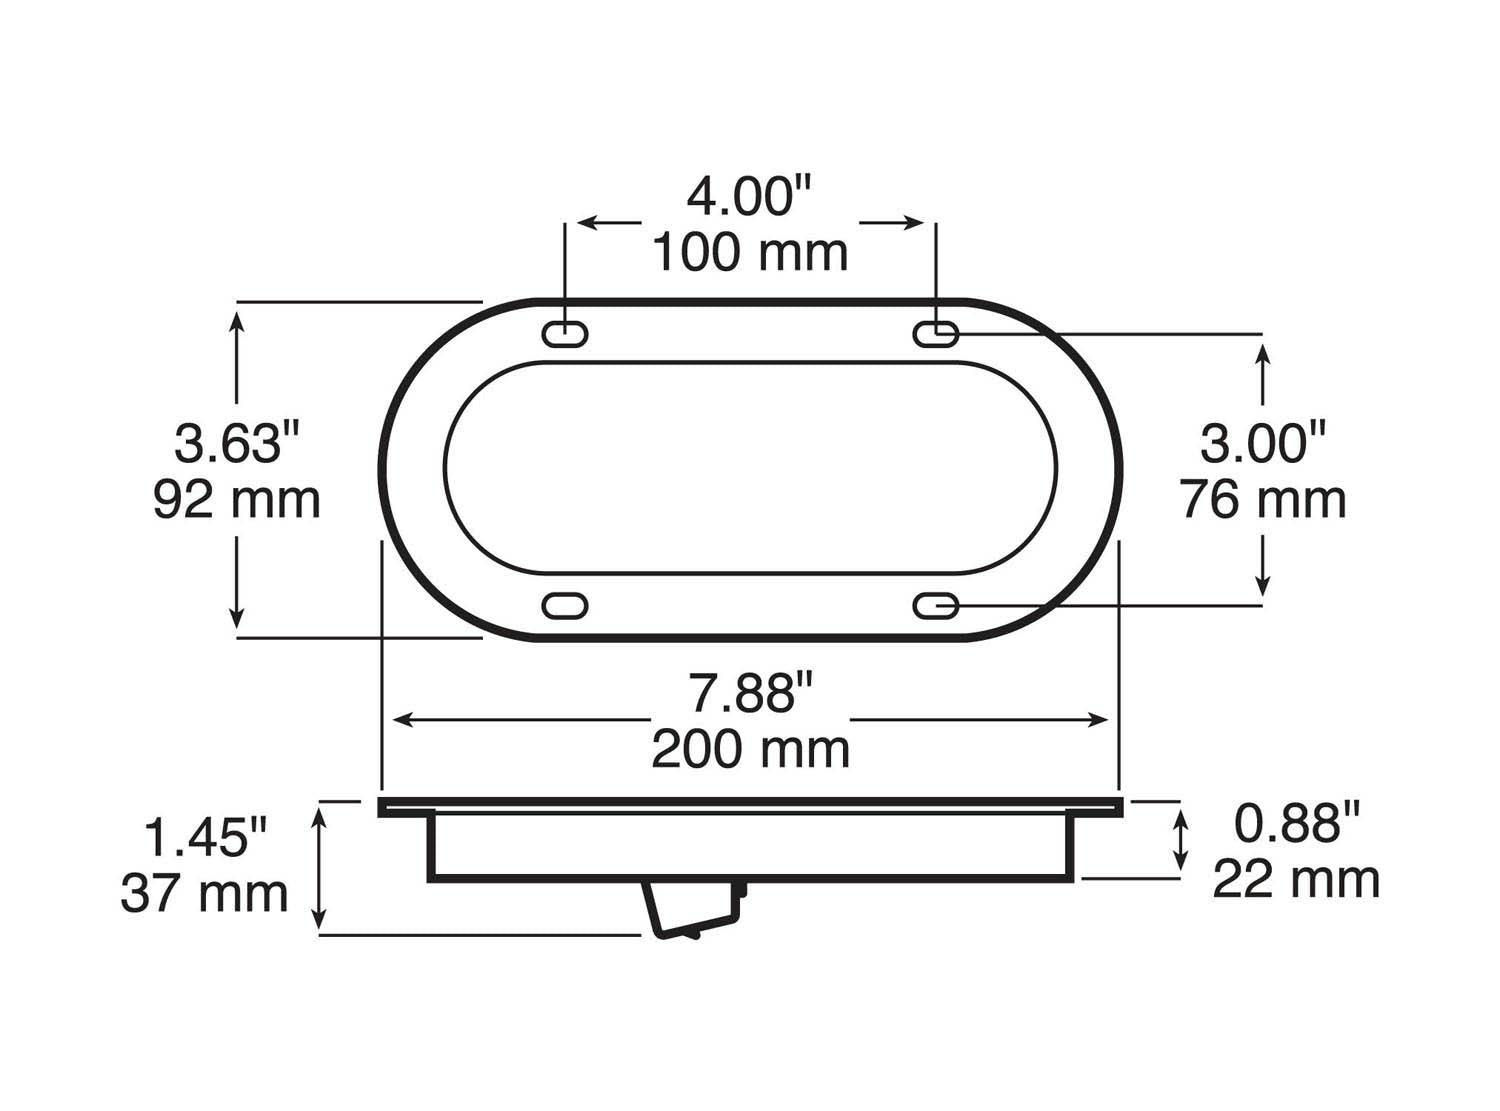 LED Stop/Turn/Tail, Oval, AMP, Flange-Mount 7.88"X3.63", Multi-volt, red, bulk pack (Pack of 50) - 823_line_dual_2view-BX5_67ed989b-9416-4686-afac-daaedc6a86f8